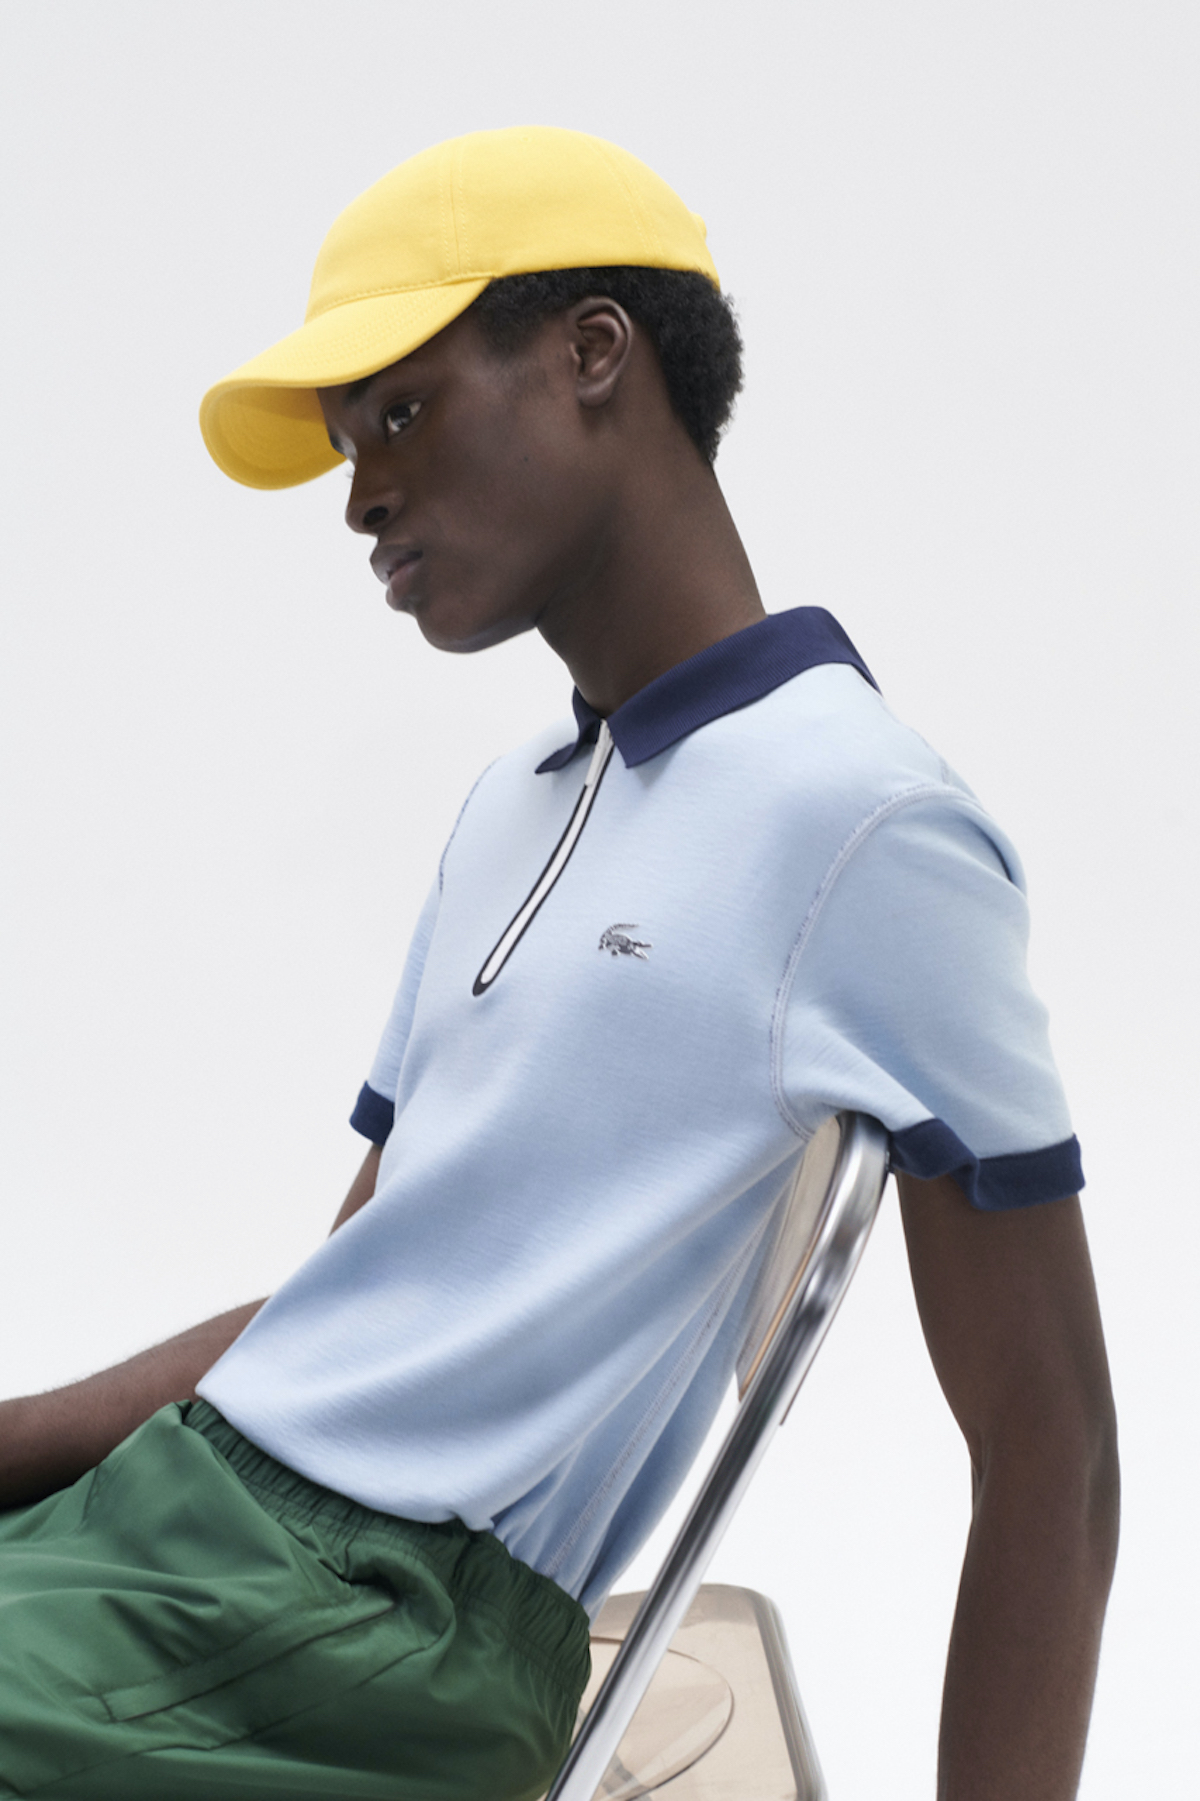 For The Champions. Lacoste AW20 – Design & Culture by Ed